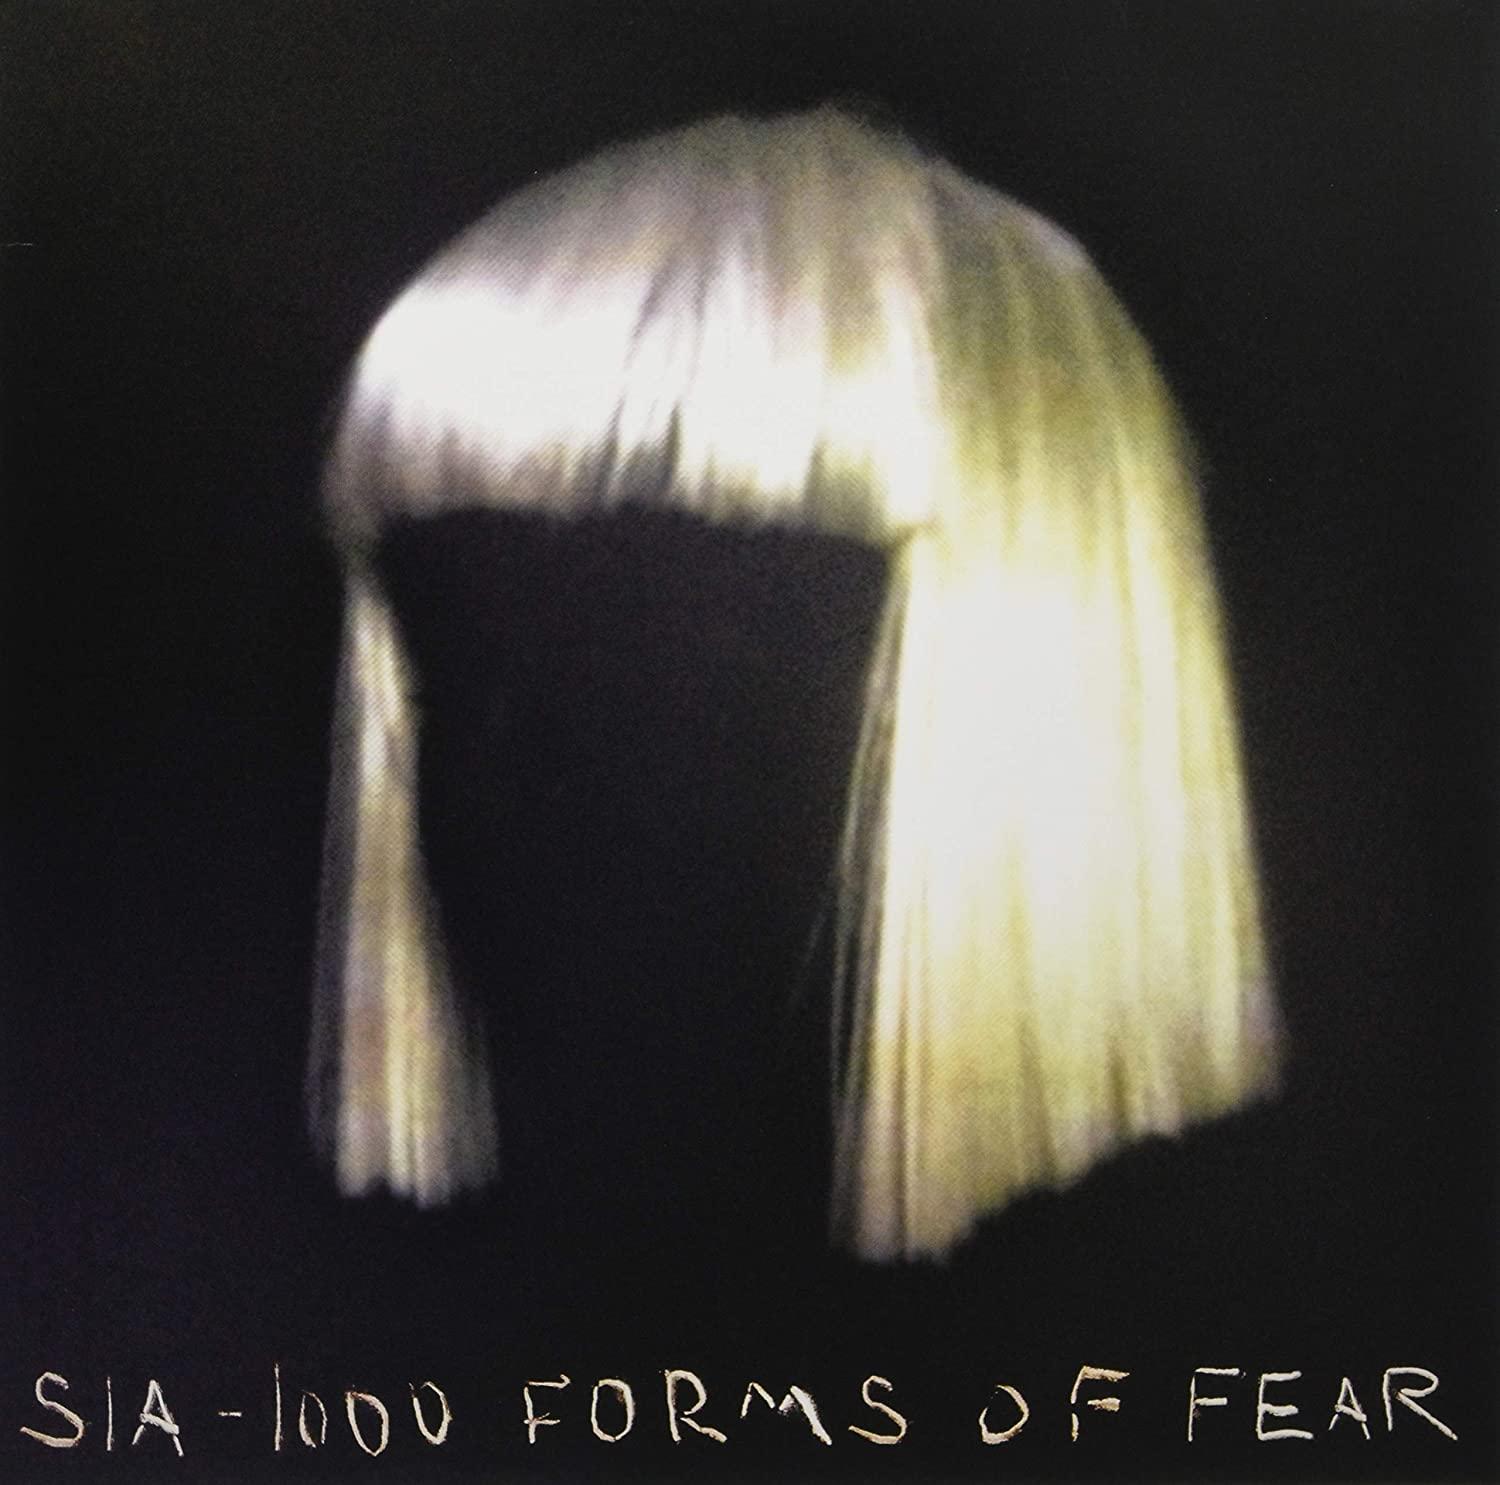 Sia - 1000 Forms of Fear (2014) LP